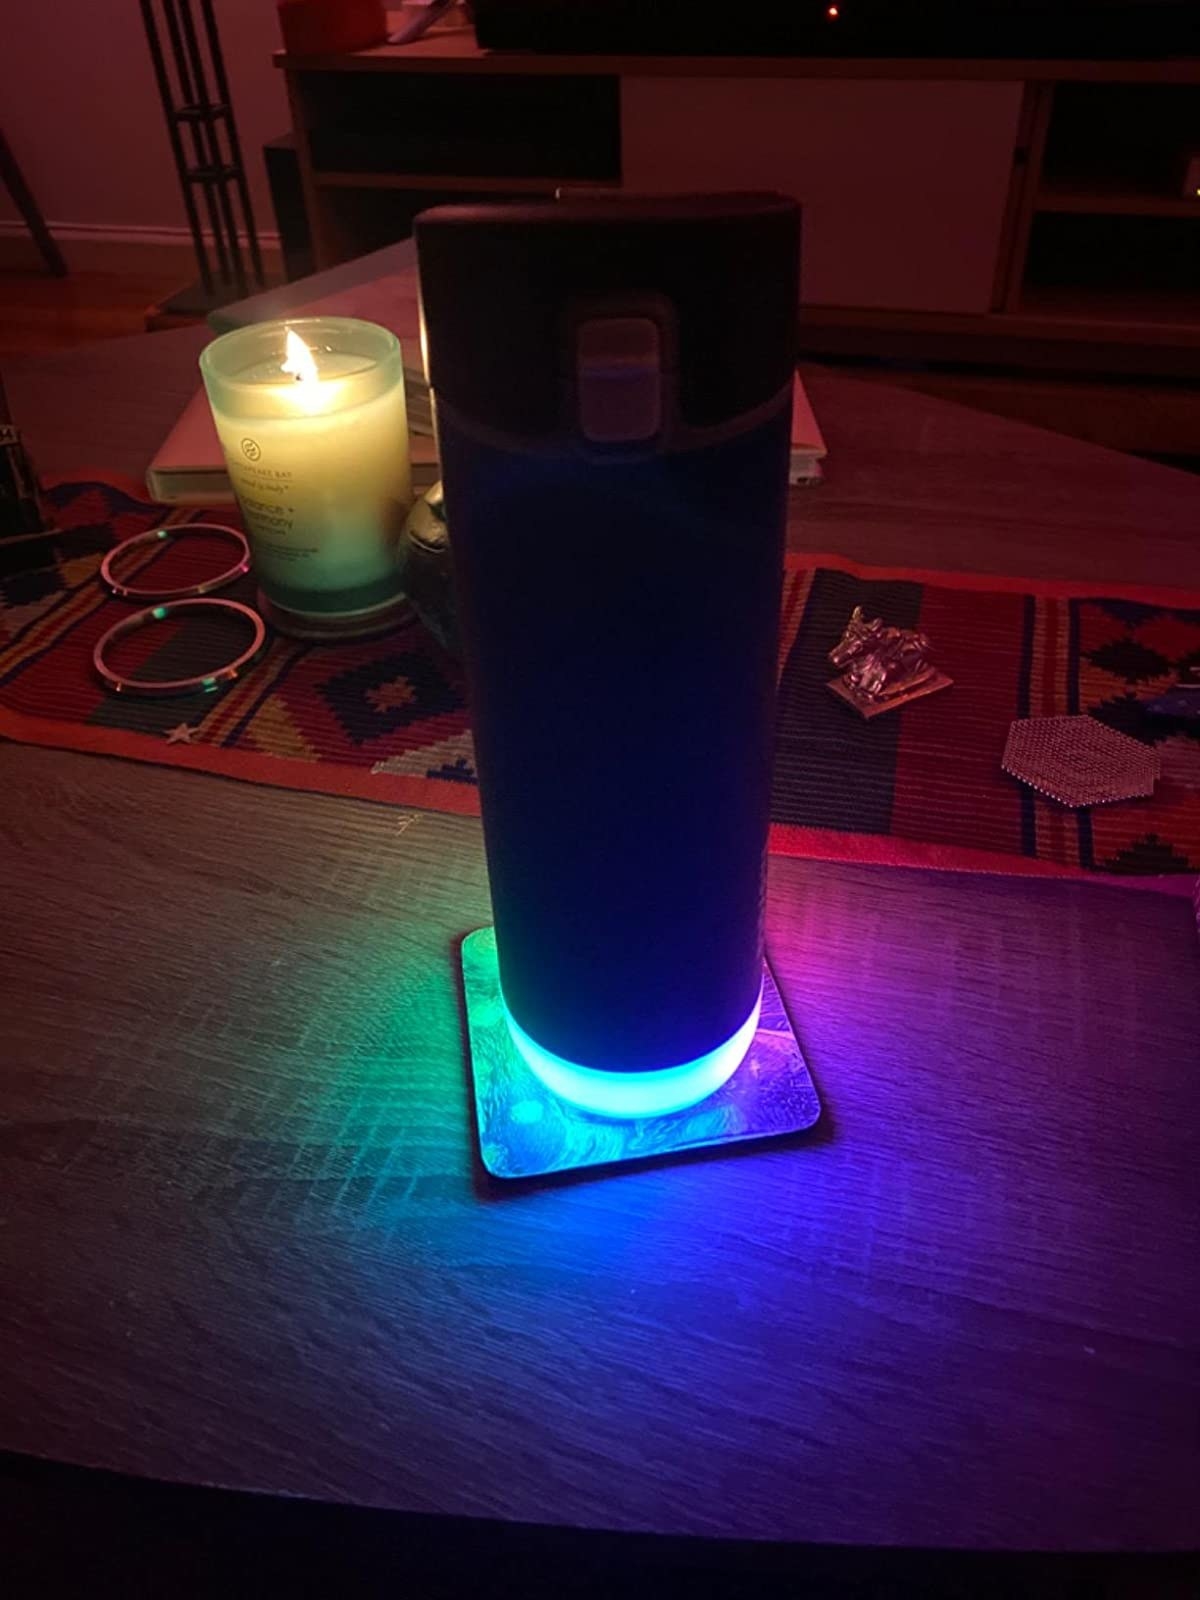 The glowing water bottle on a table